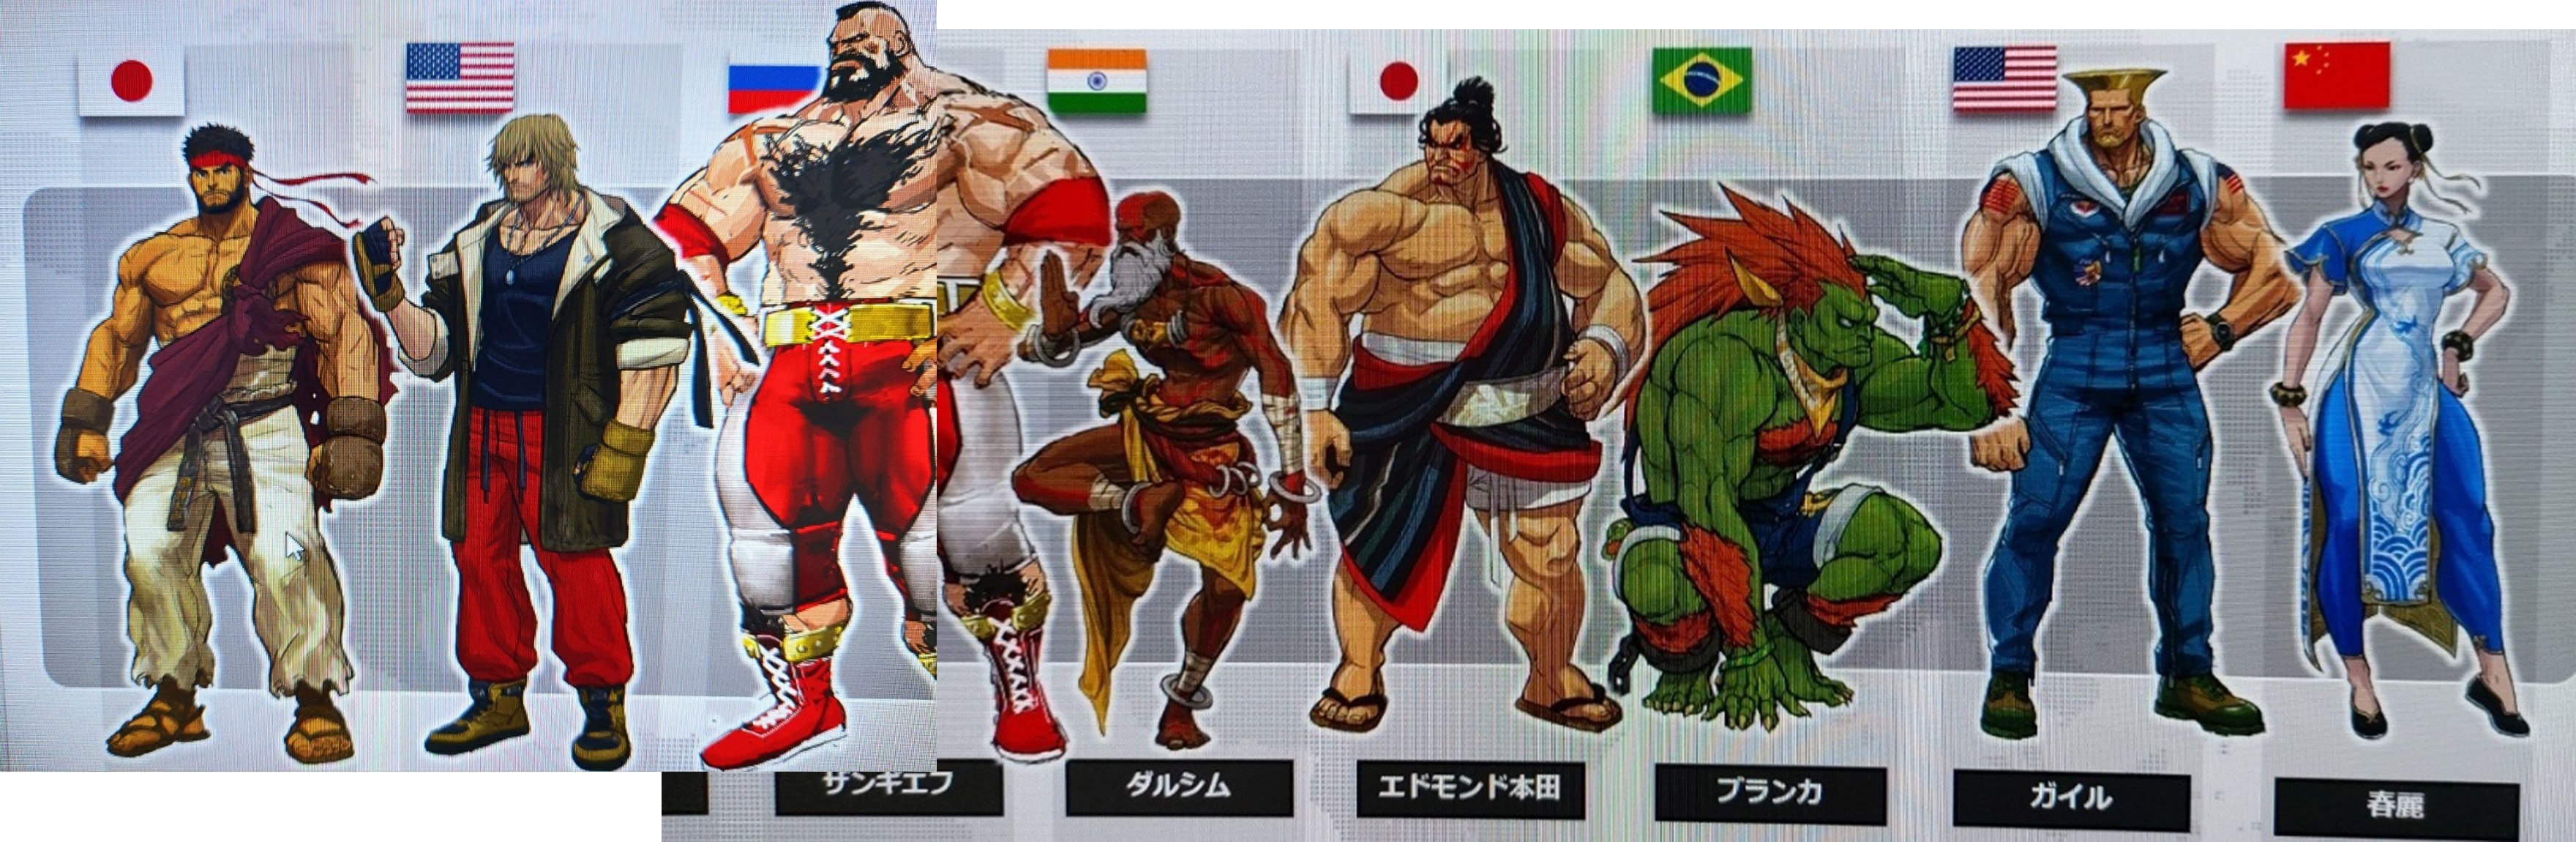 The Judge  Street fighter art, Street fighter characters, Street fighter